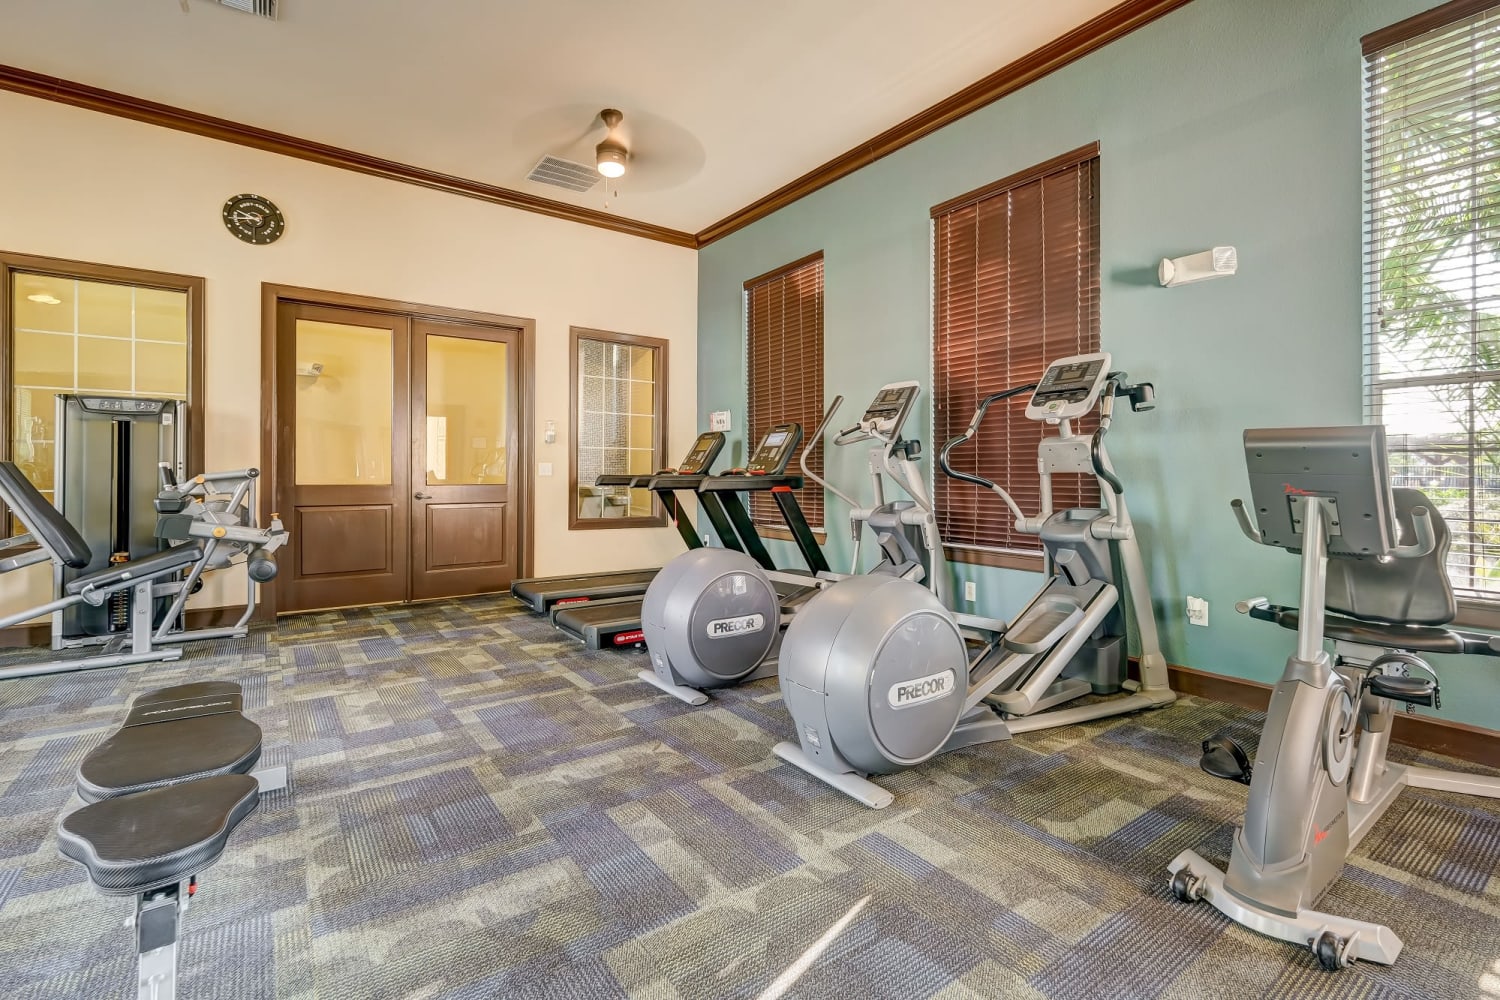 Fitness center cardio equipment at Chateau Mirage Apartment Homes in Lafayette, Louisiana 